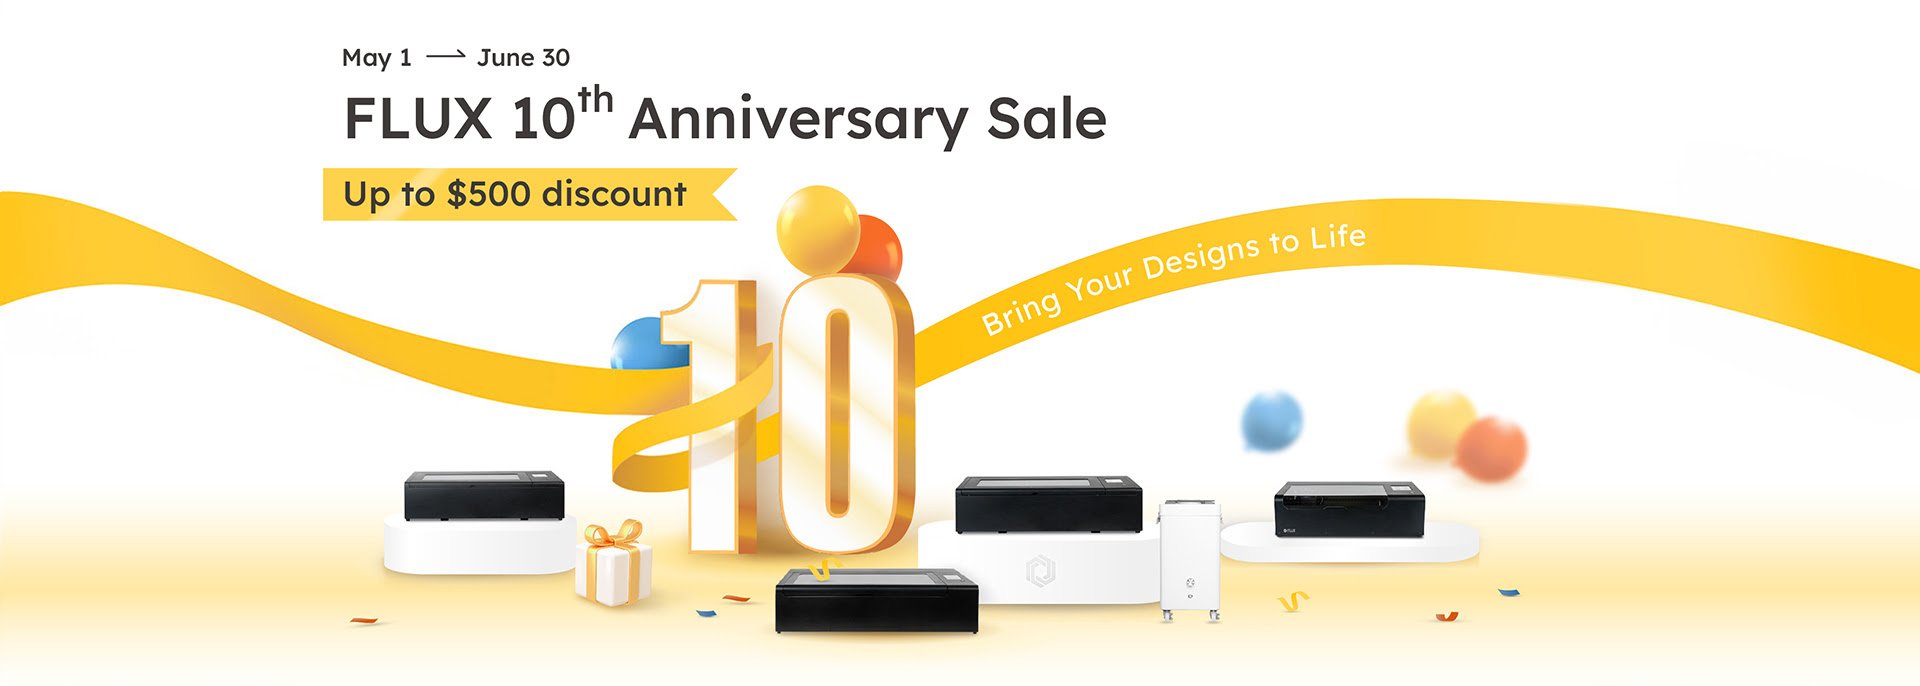 From May 1st until June 30th it is FLUX 10th Anniversary Sale with up to $500 discount